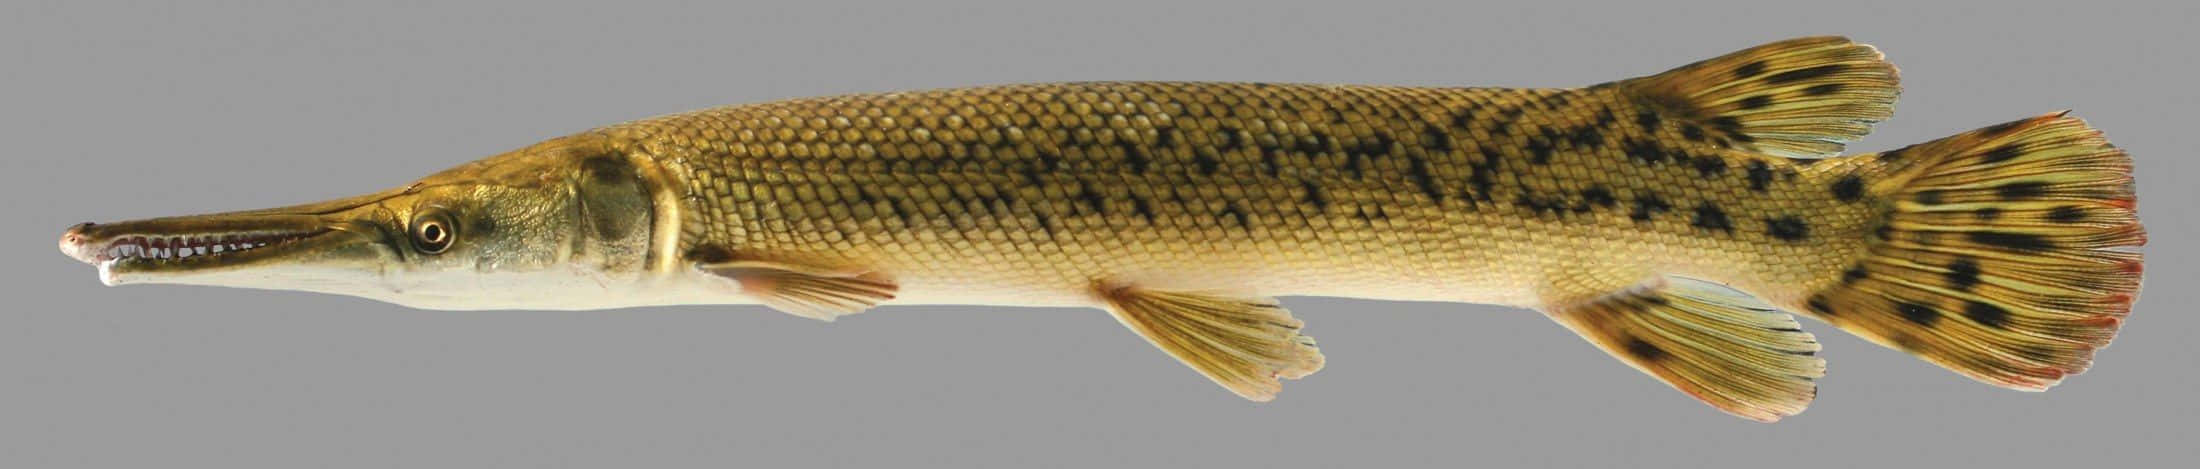 A Fish With A Long Tail Is Shown